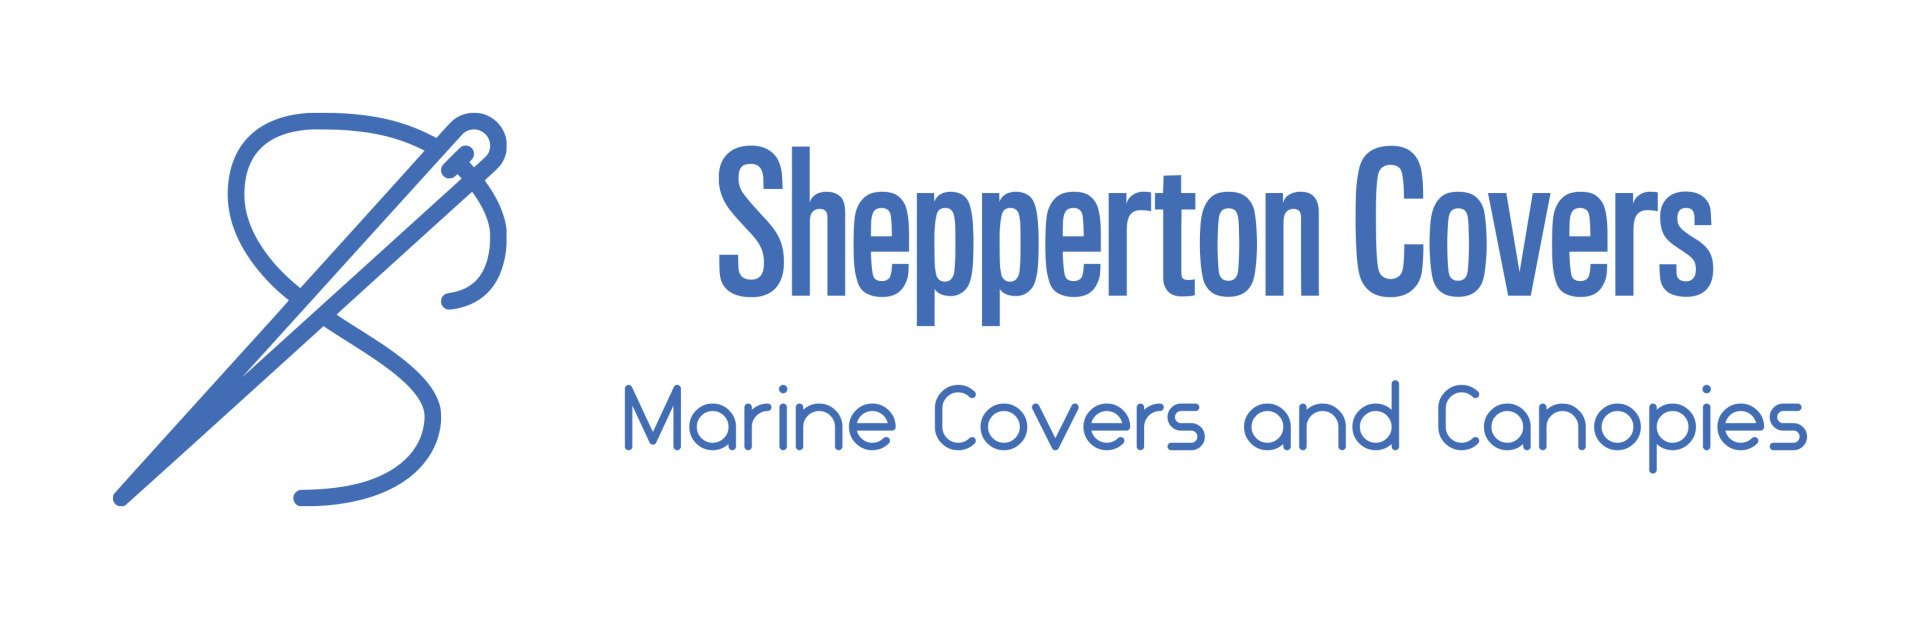 Shepperton Covers